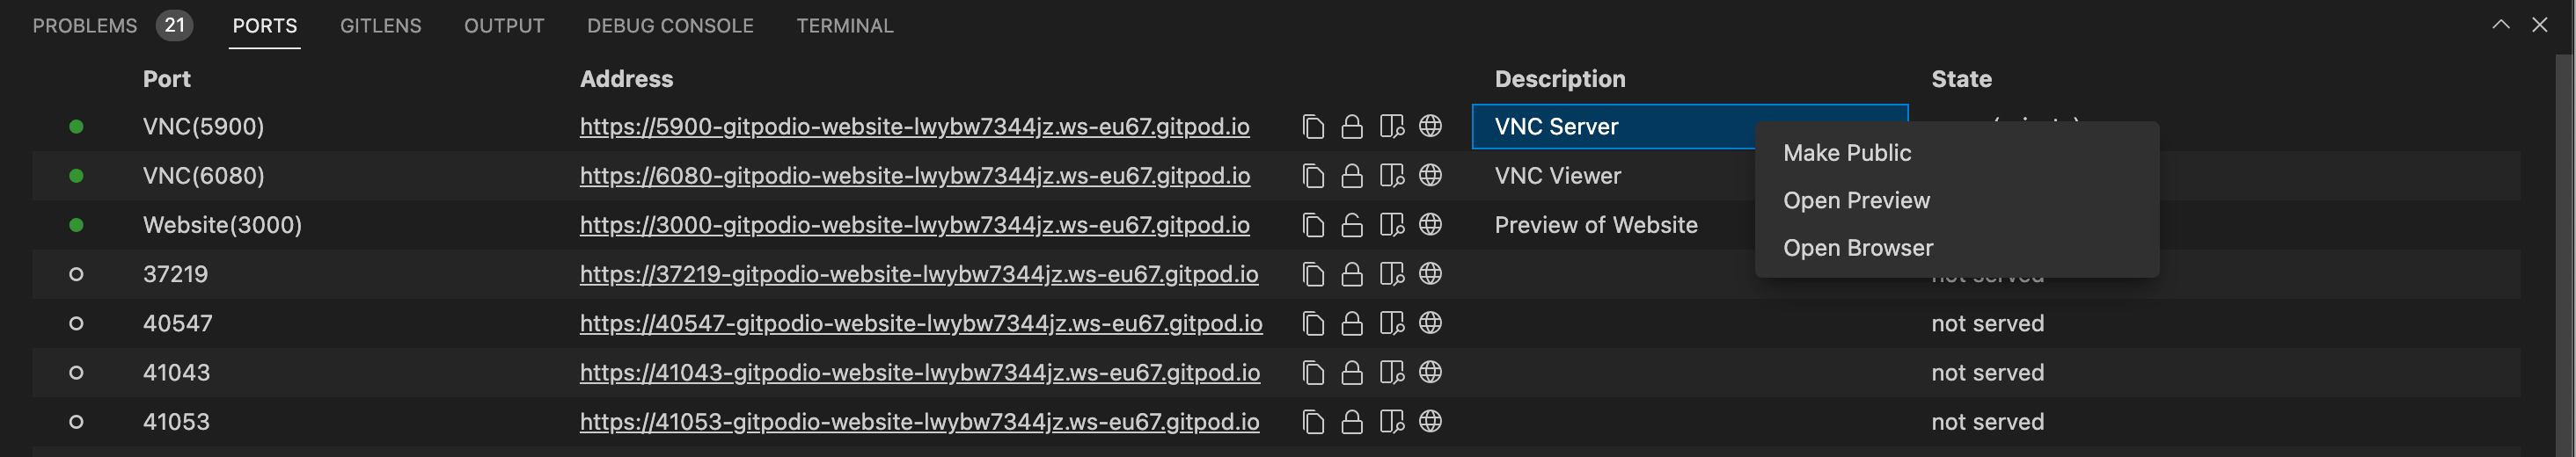 The PORTS tab in VS Code Browser with a single port's actions